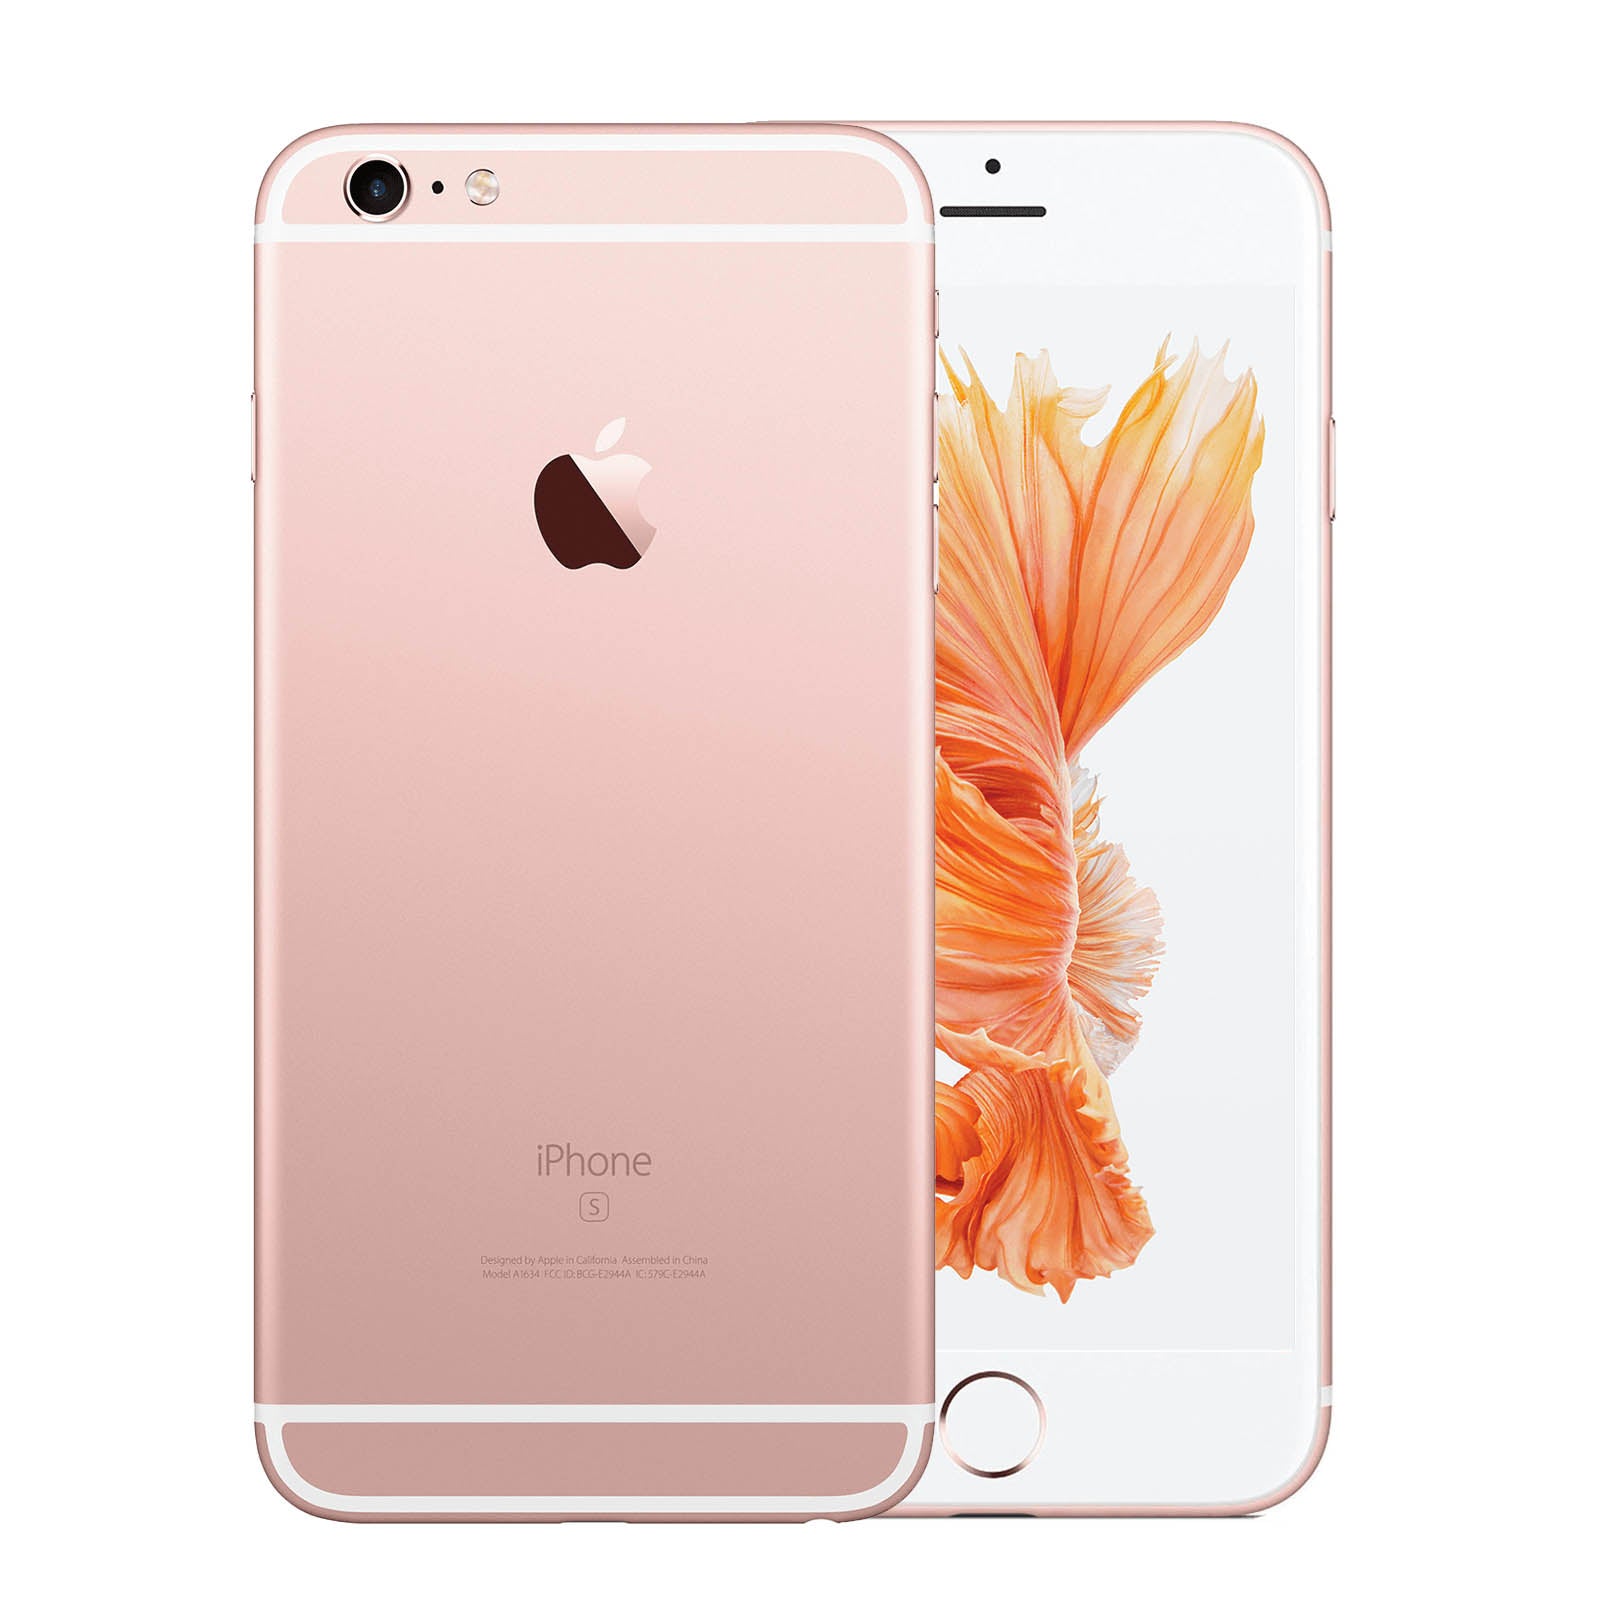 iPhone 6s Gold 32 GB au - 通販 - 363photography.org